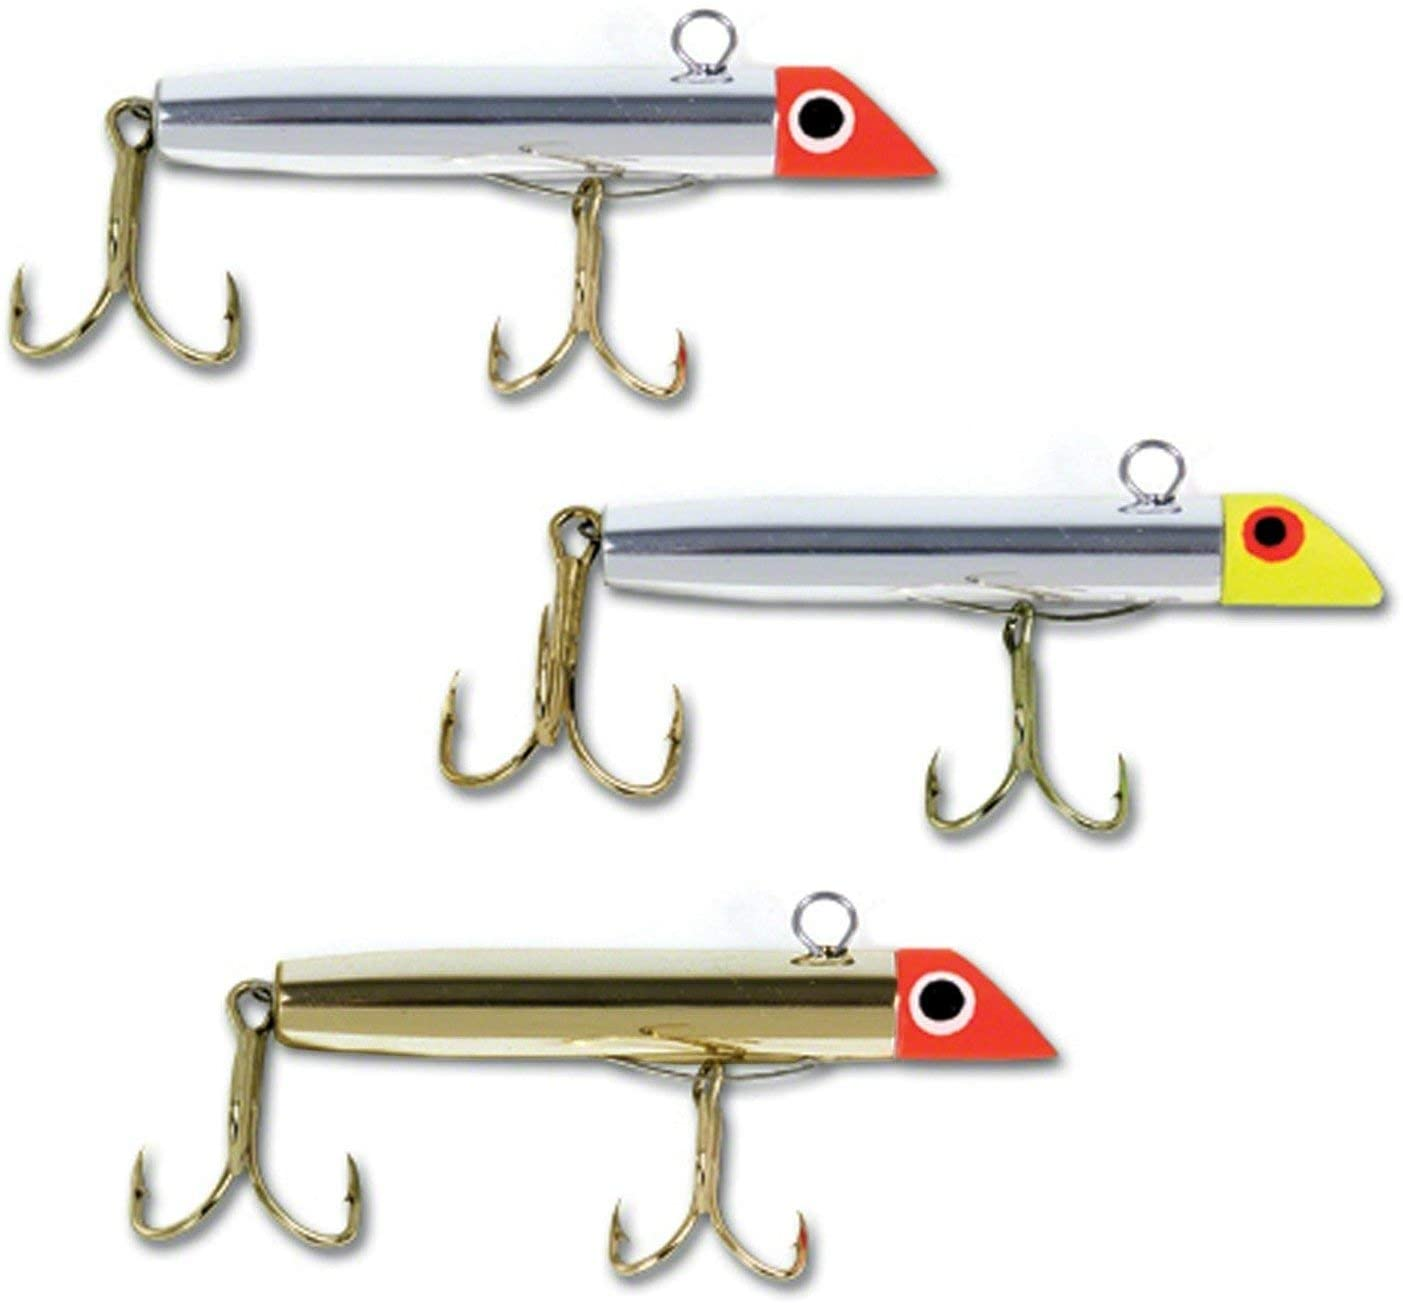 Spanish Mackerel Lure - Page 2 - The Hull Truth - Boating and Fishing Forum